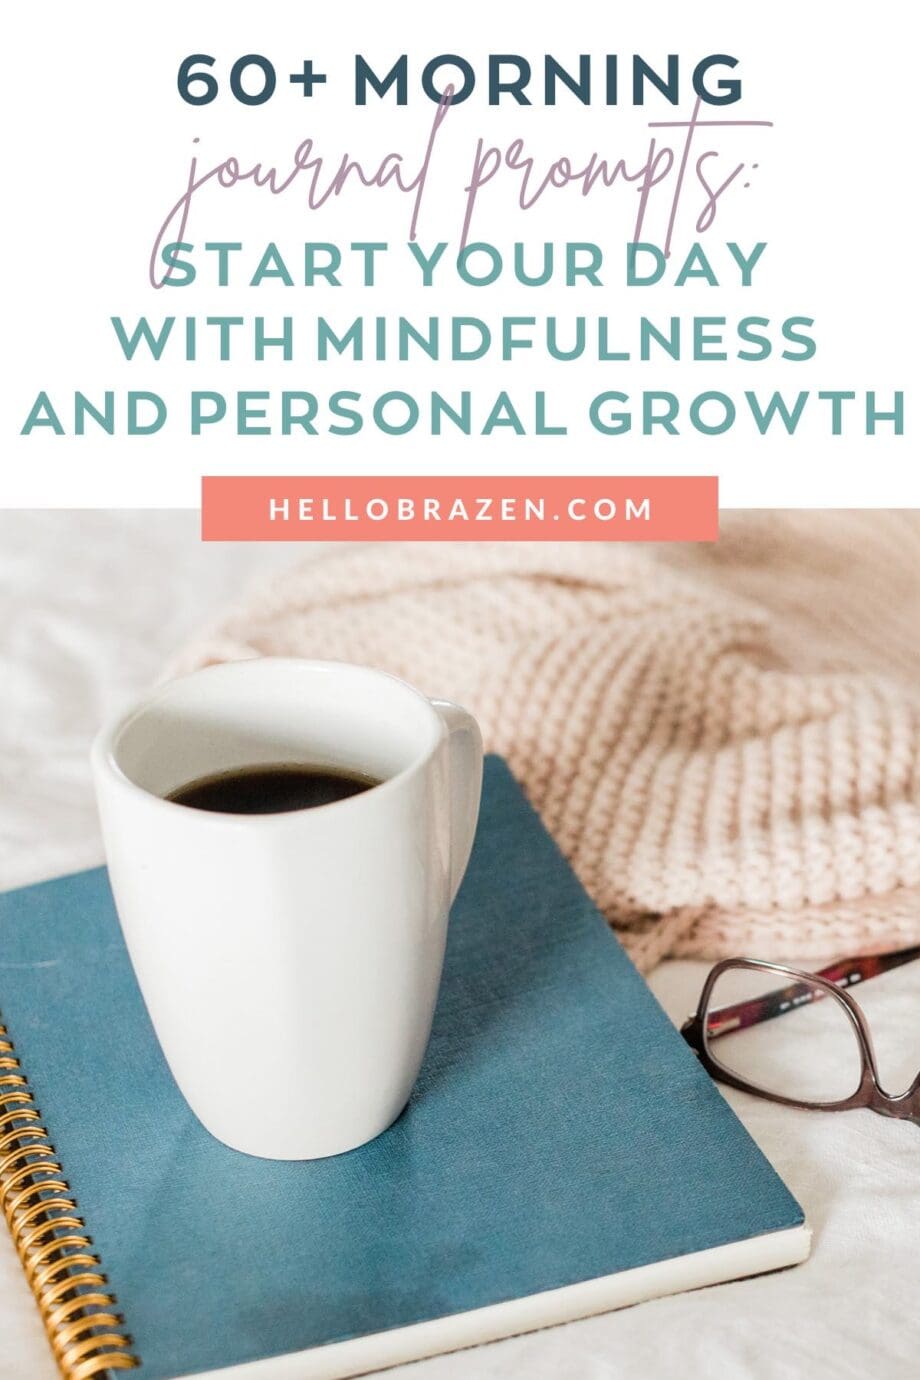 Morning journaling is one of the most powerful ways to journal because it can have such a positive and lasting effect on the rest of your day. Here are 60 morning journaling prompts to start your day with mindfulness and personal growth.